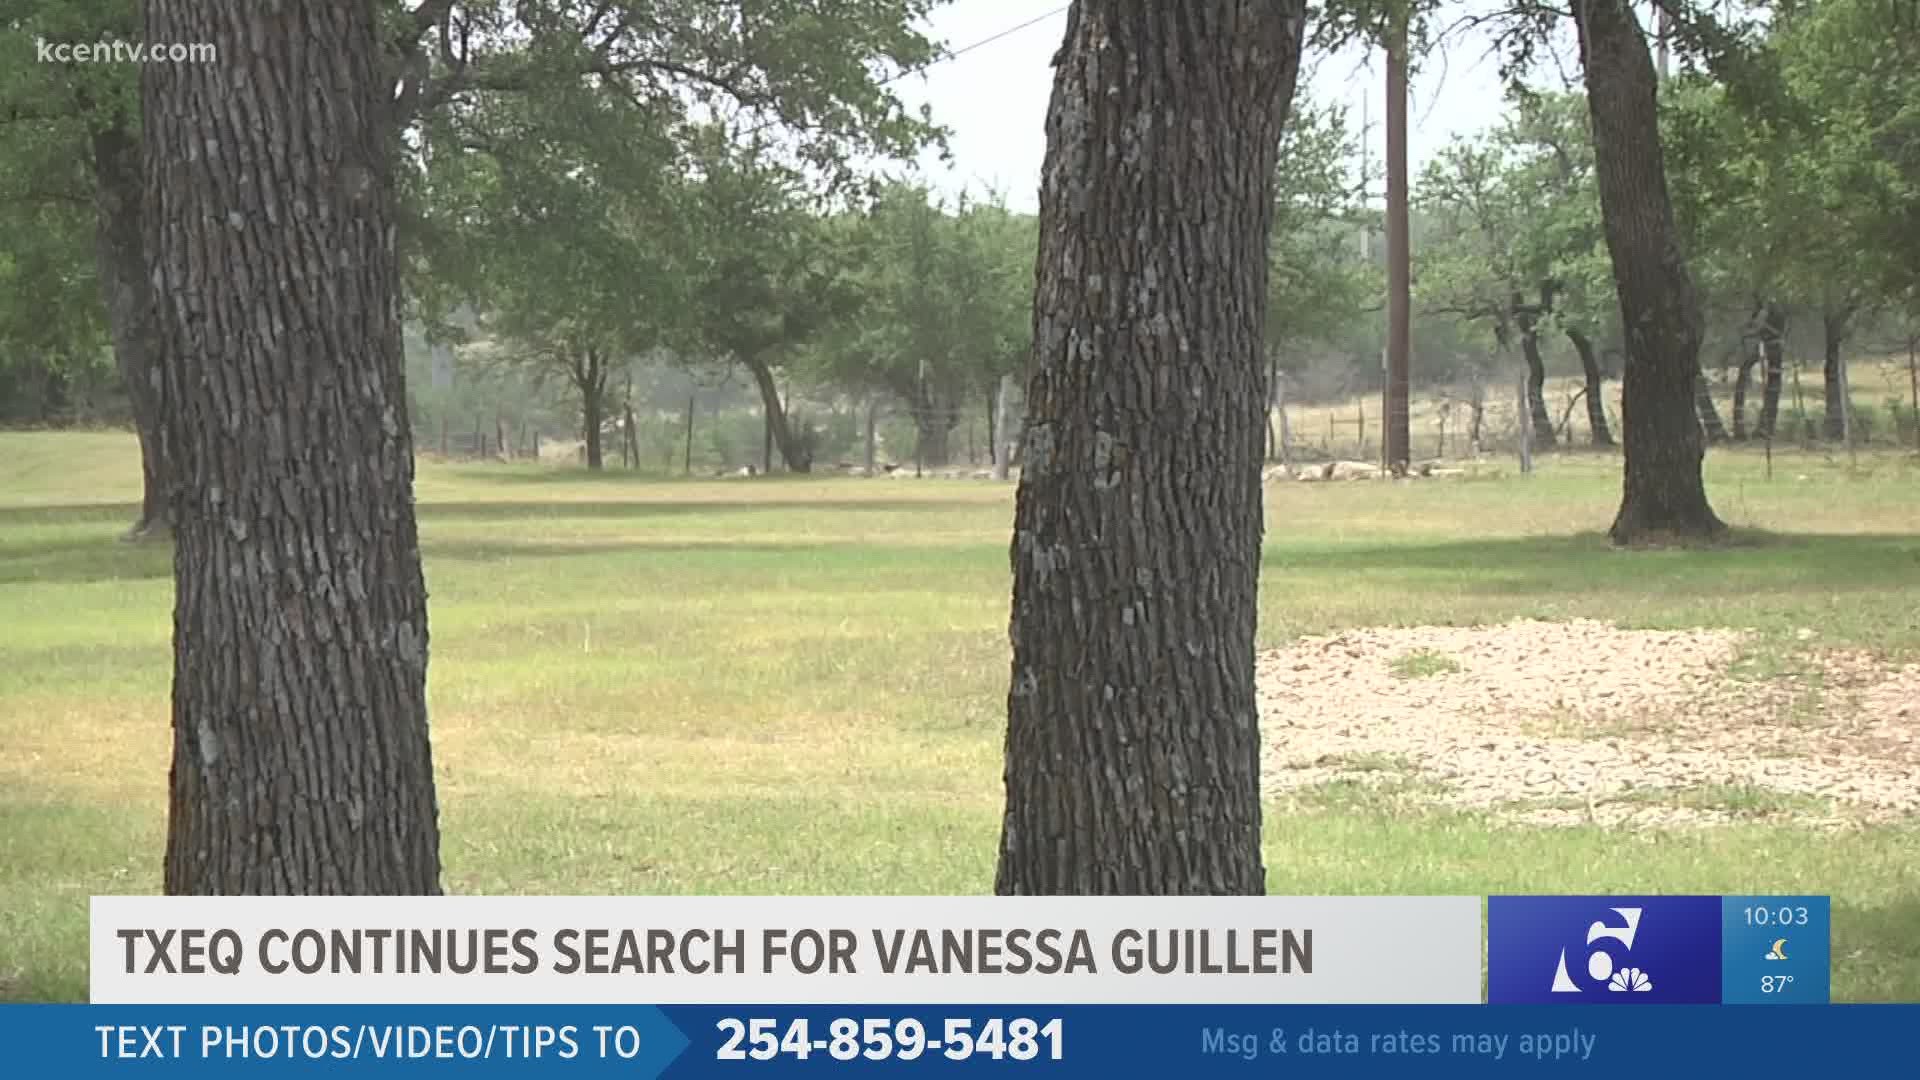 Texas Equusearch was back in the area June 27 after a tip led brought the search team to Coryell County. However, they reported no signs of Guillen.